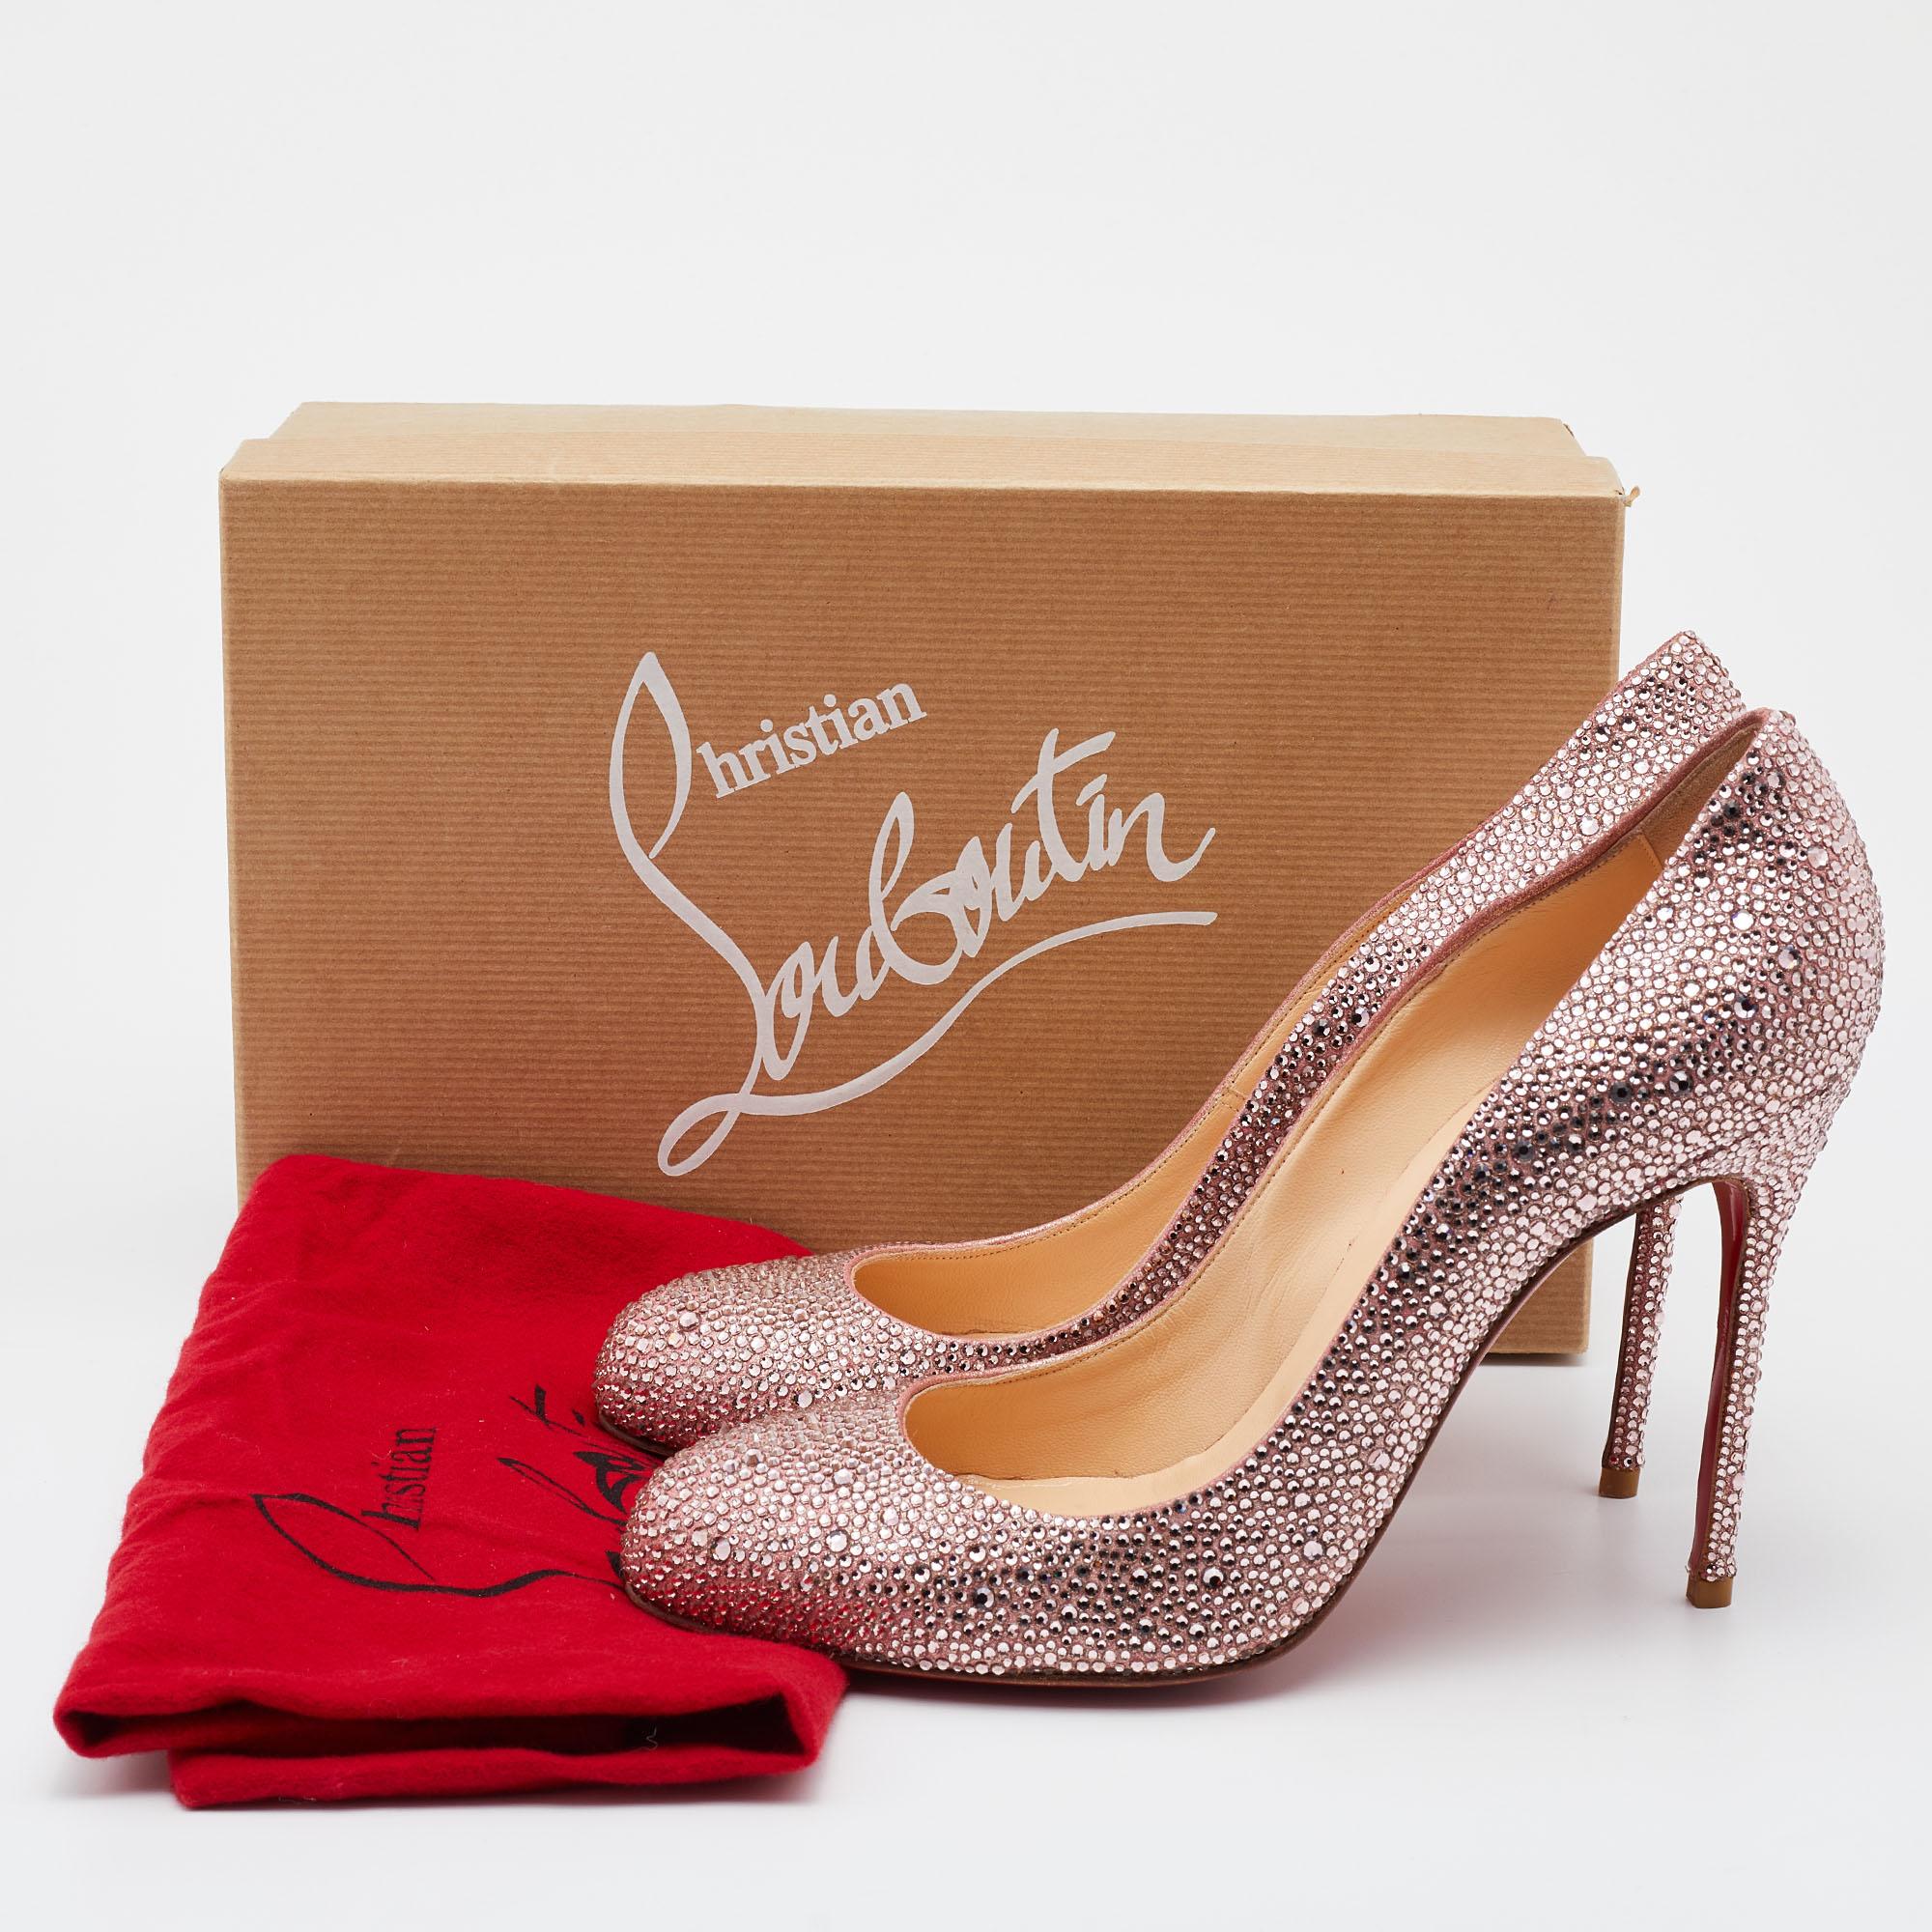 Christian Louboutin Pink Crystal Embellished Suede Fifi Strass Pumps Size 40.5 5